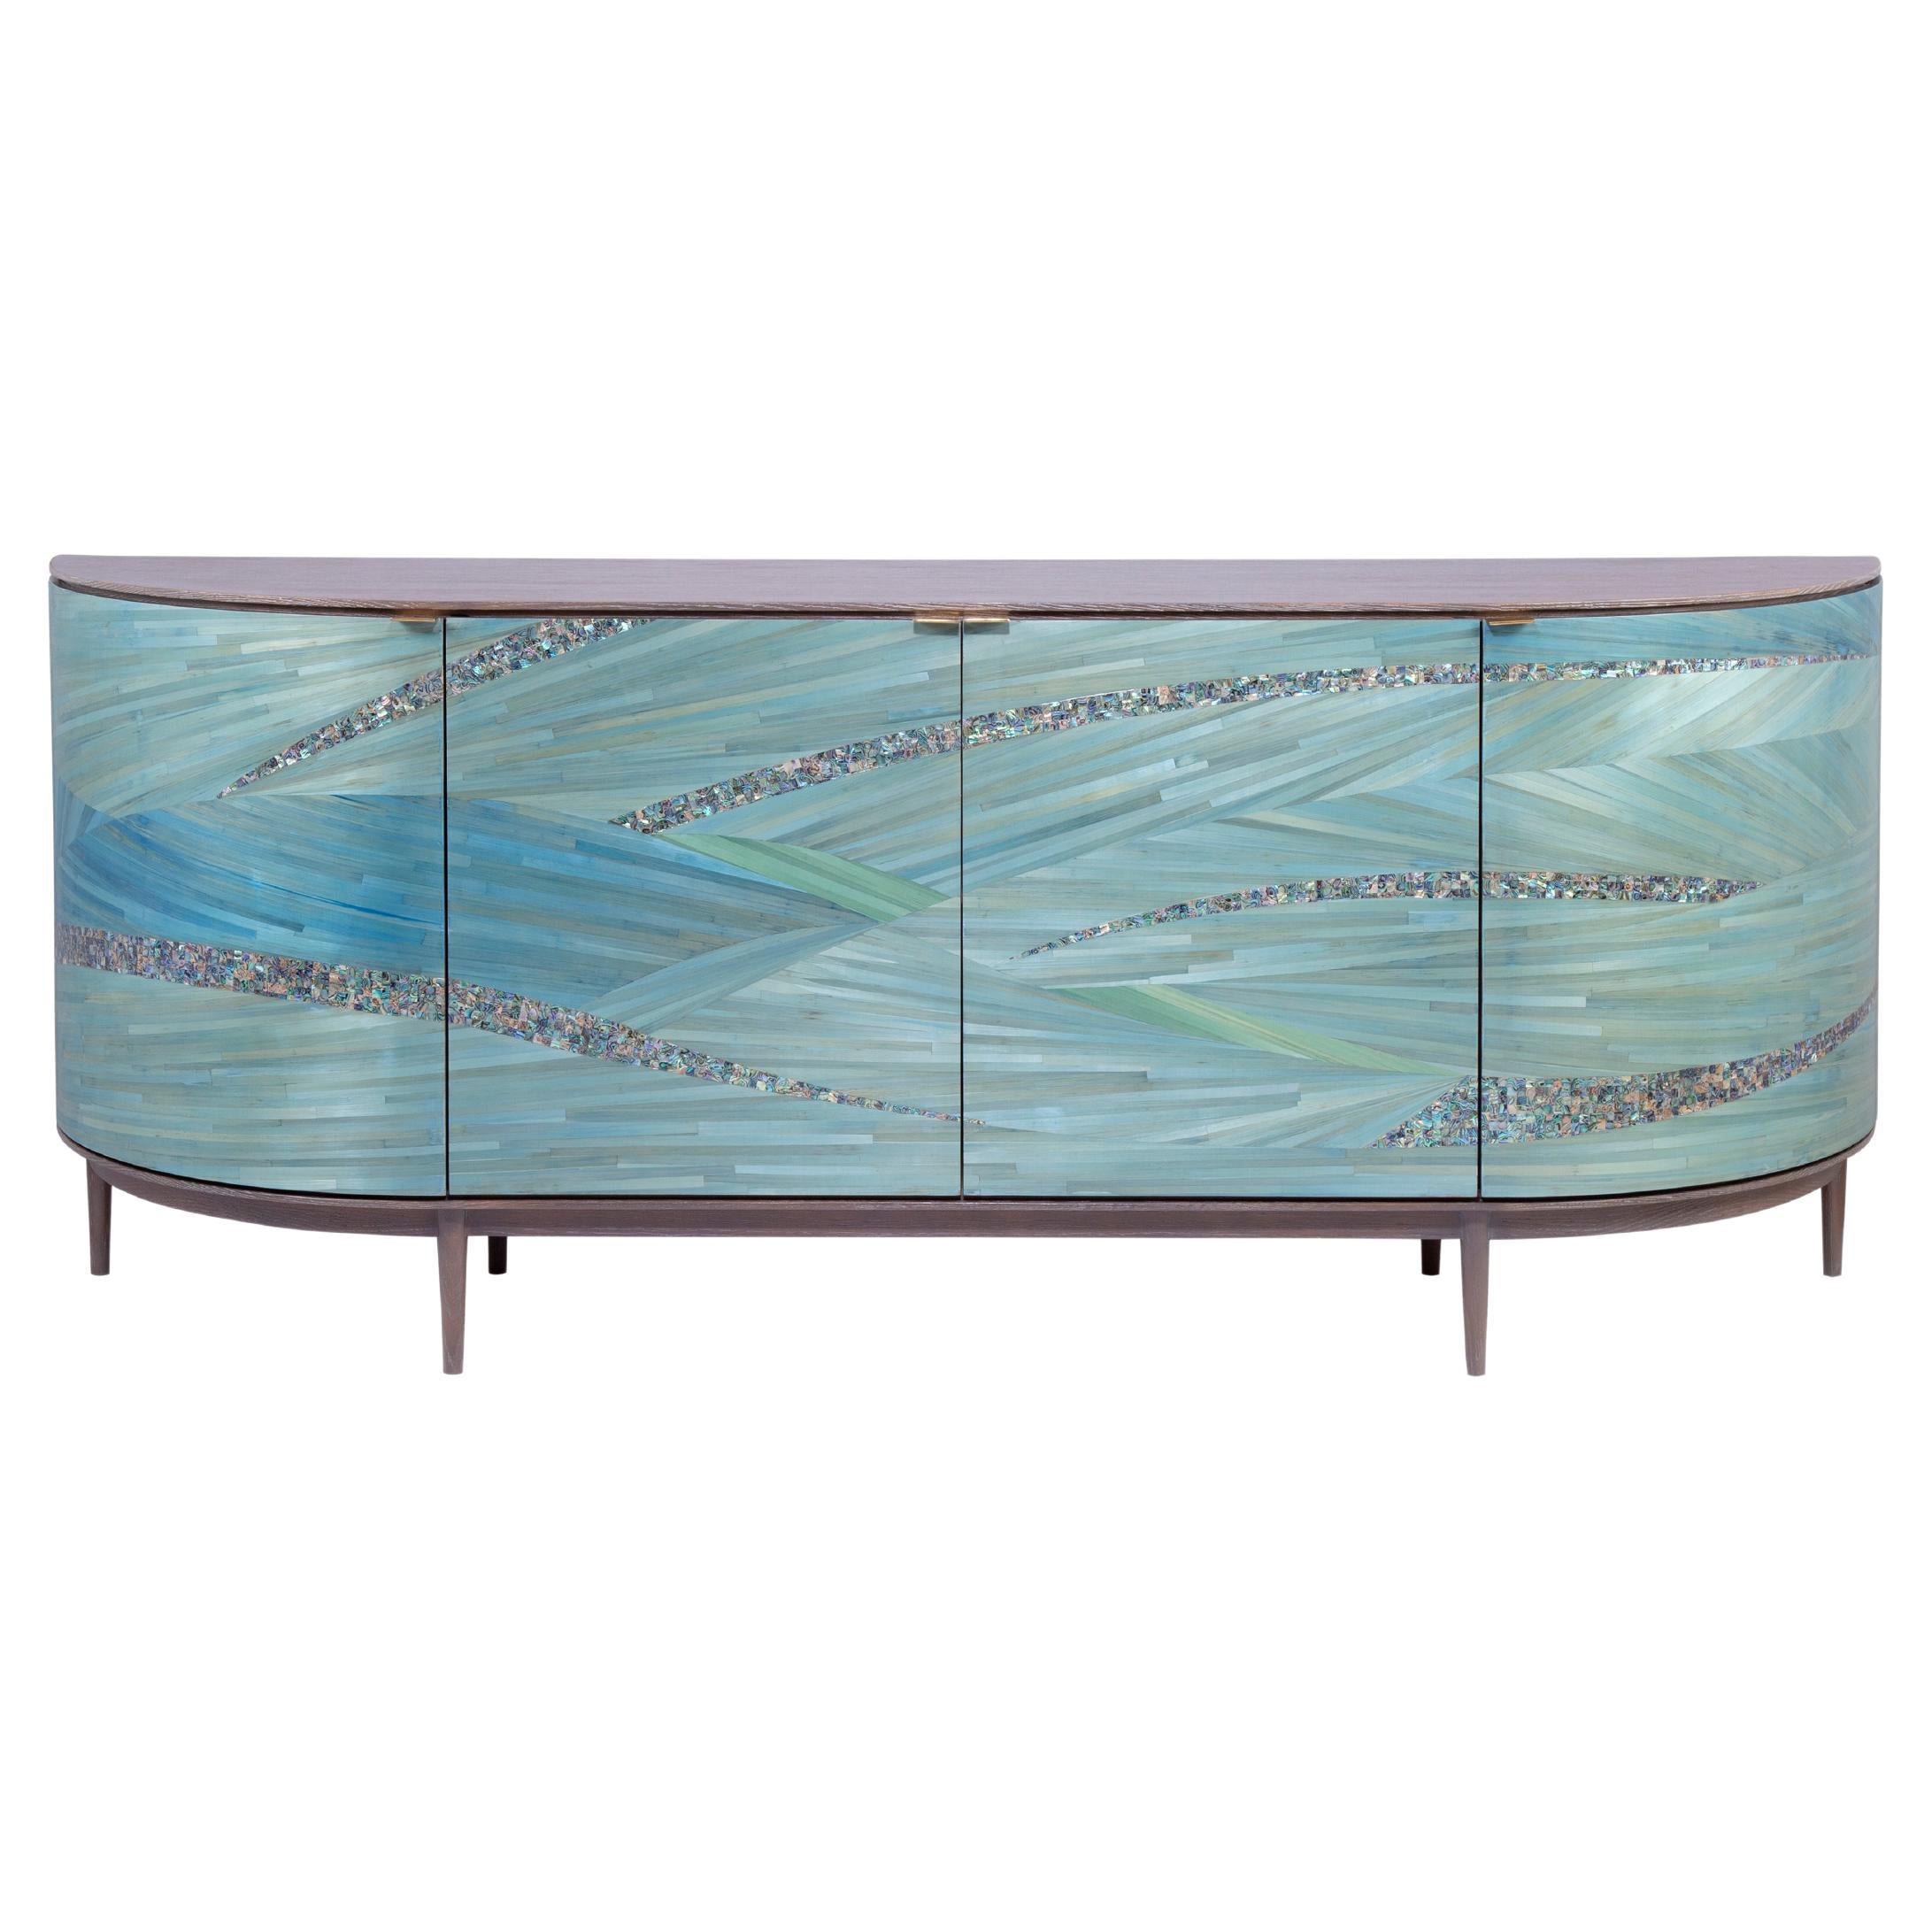 Luxury Sideboard with Rare Turquoise Mother of Pearl and Hand-Laid Blue Straw For Sale